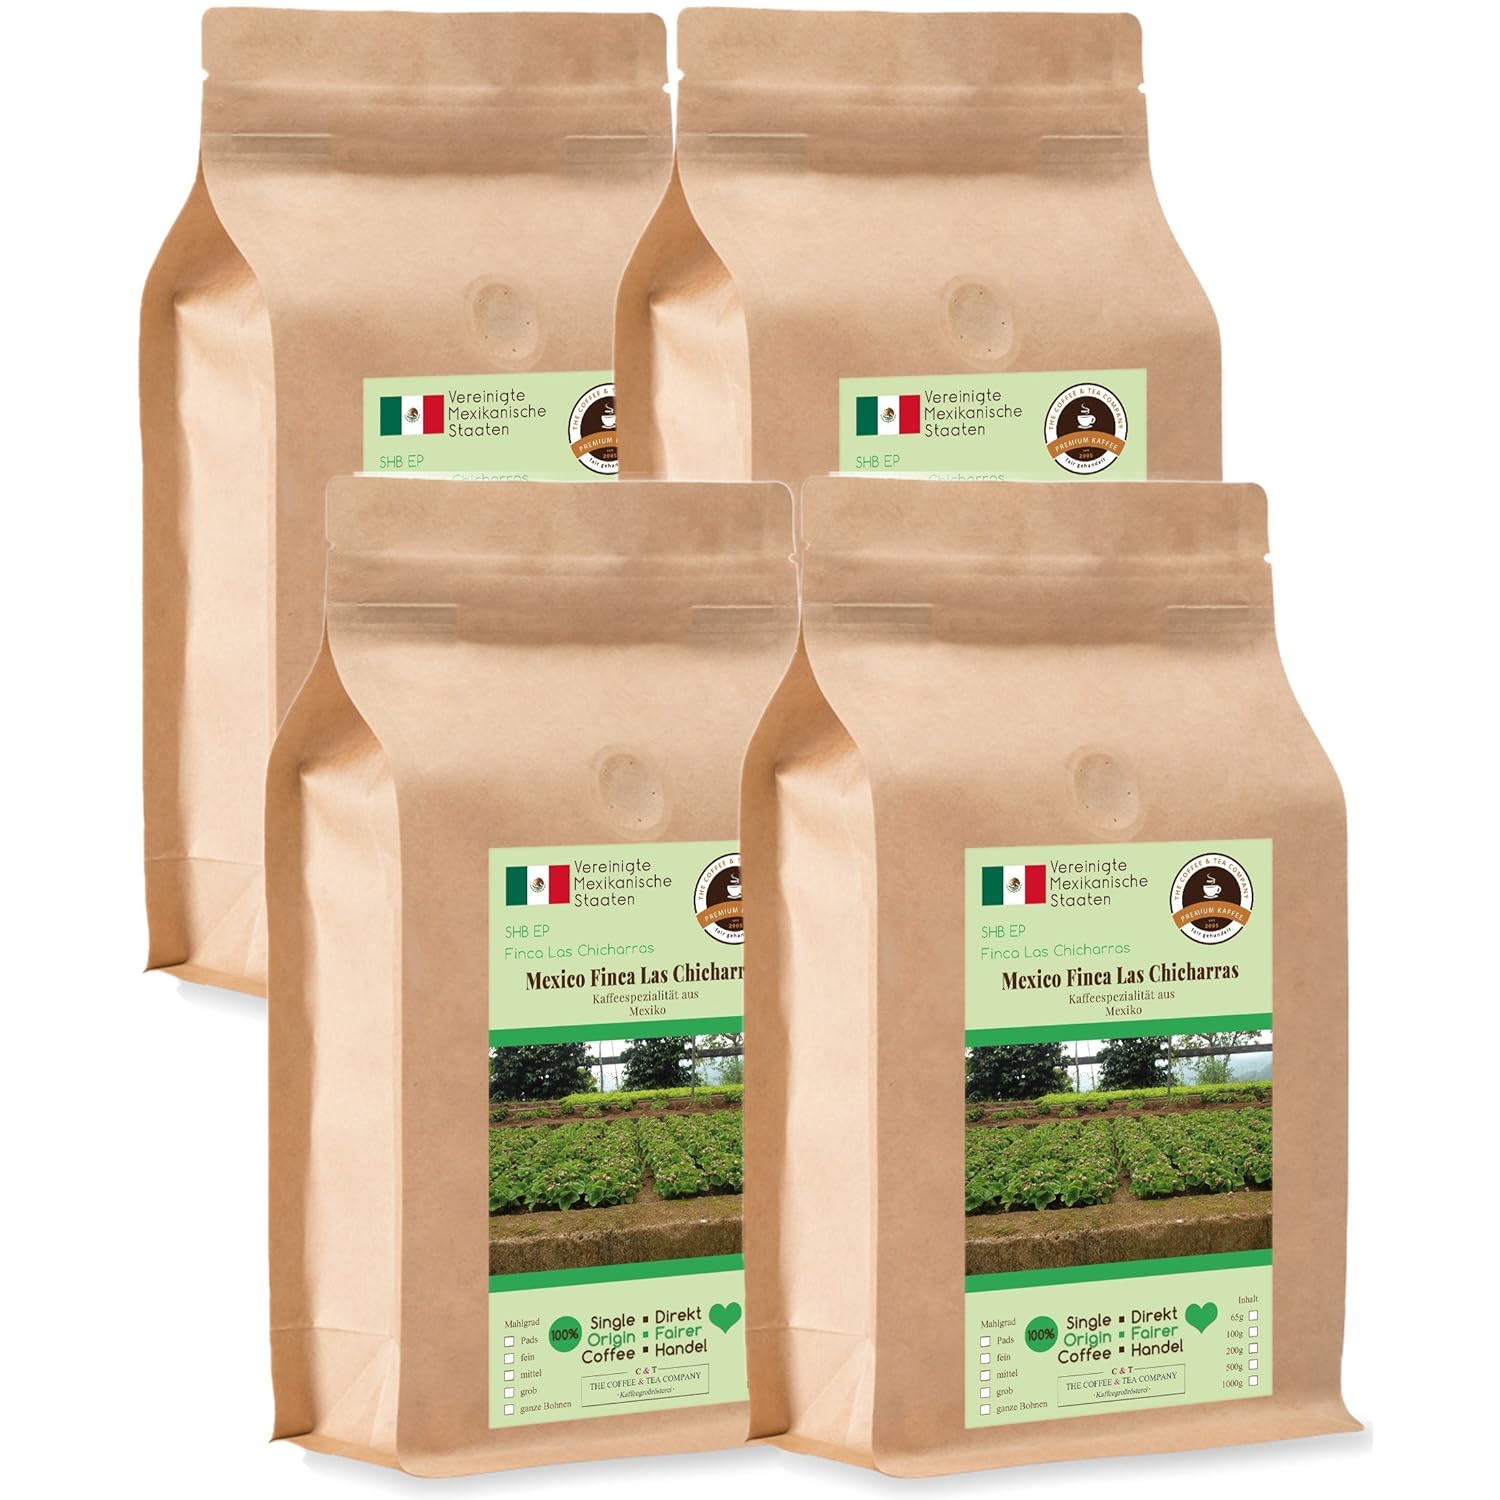 Coffee Globetrotter - Coffee with Heart - Mexico Finca Las Chicharras - 4 x 1000 g Whole Bean - for Fully Automatic Coffee Grinder - Roasted Coffee Fair Trade | Gastropack Economy Pack